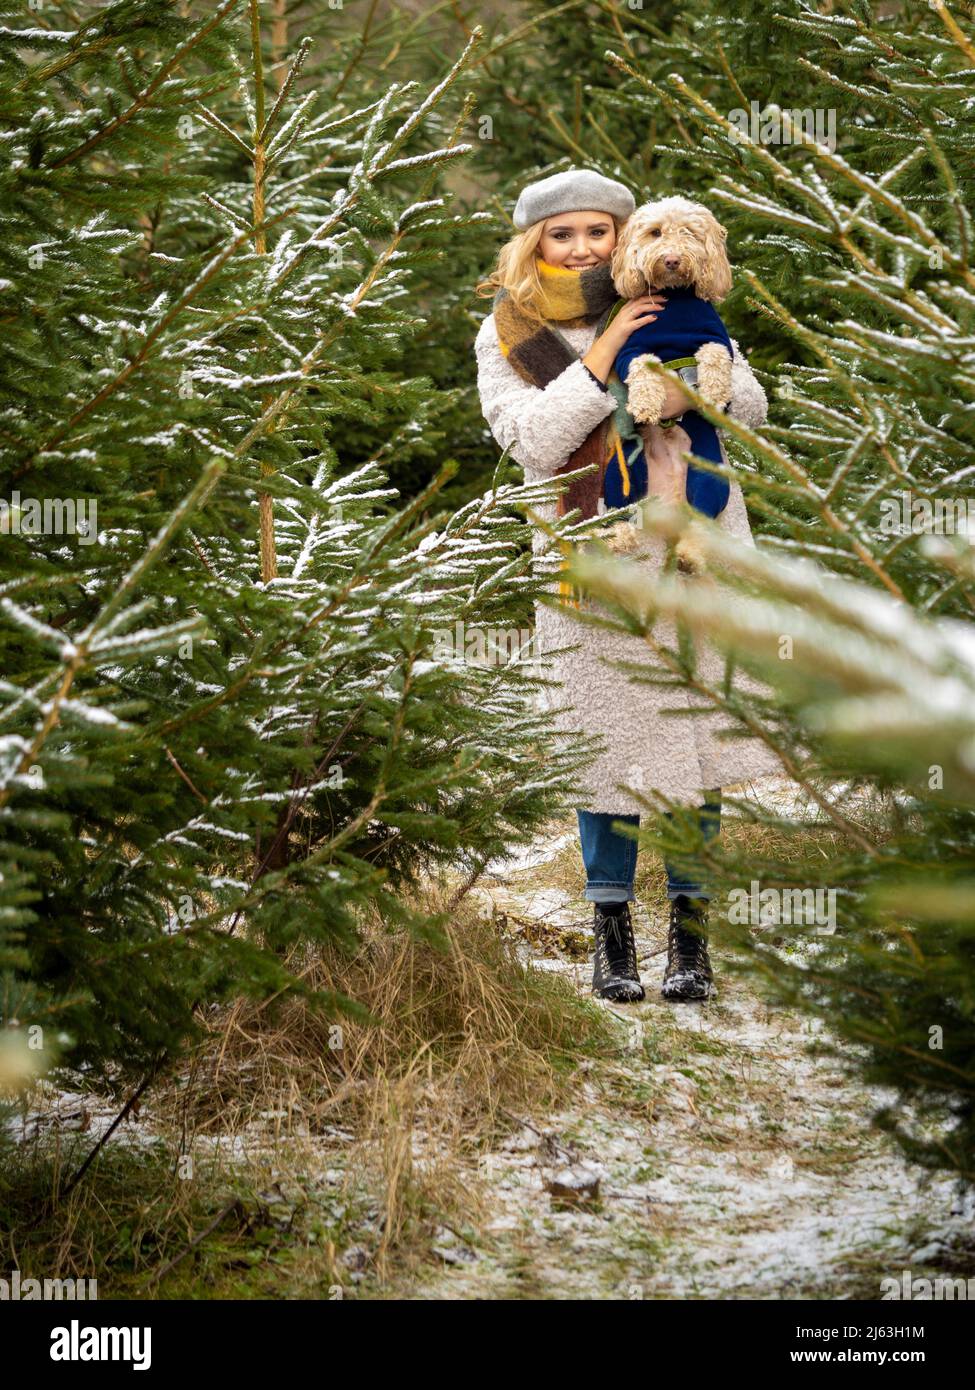 Young blonde haired woman holding a dog standing amongst snow covered Christmas trees. Stock Photo